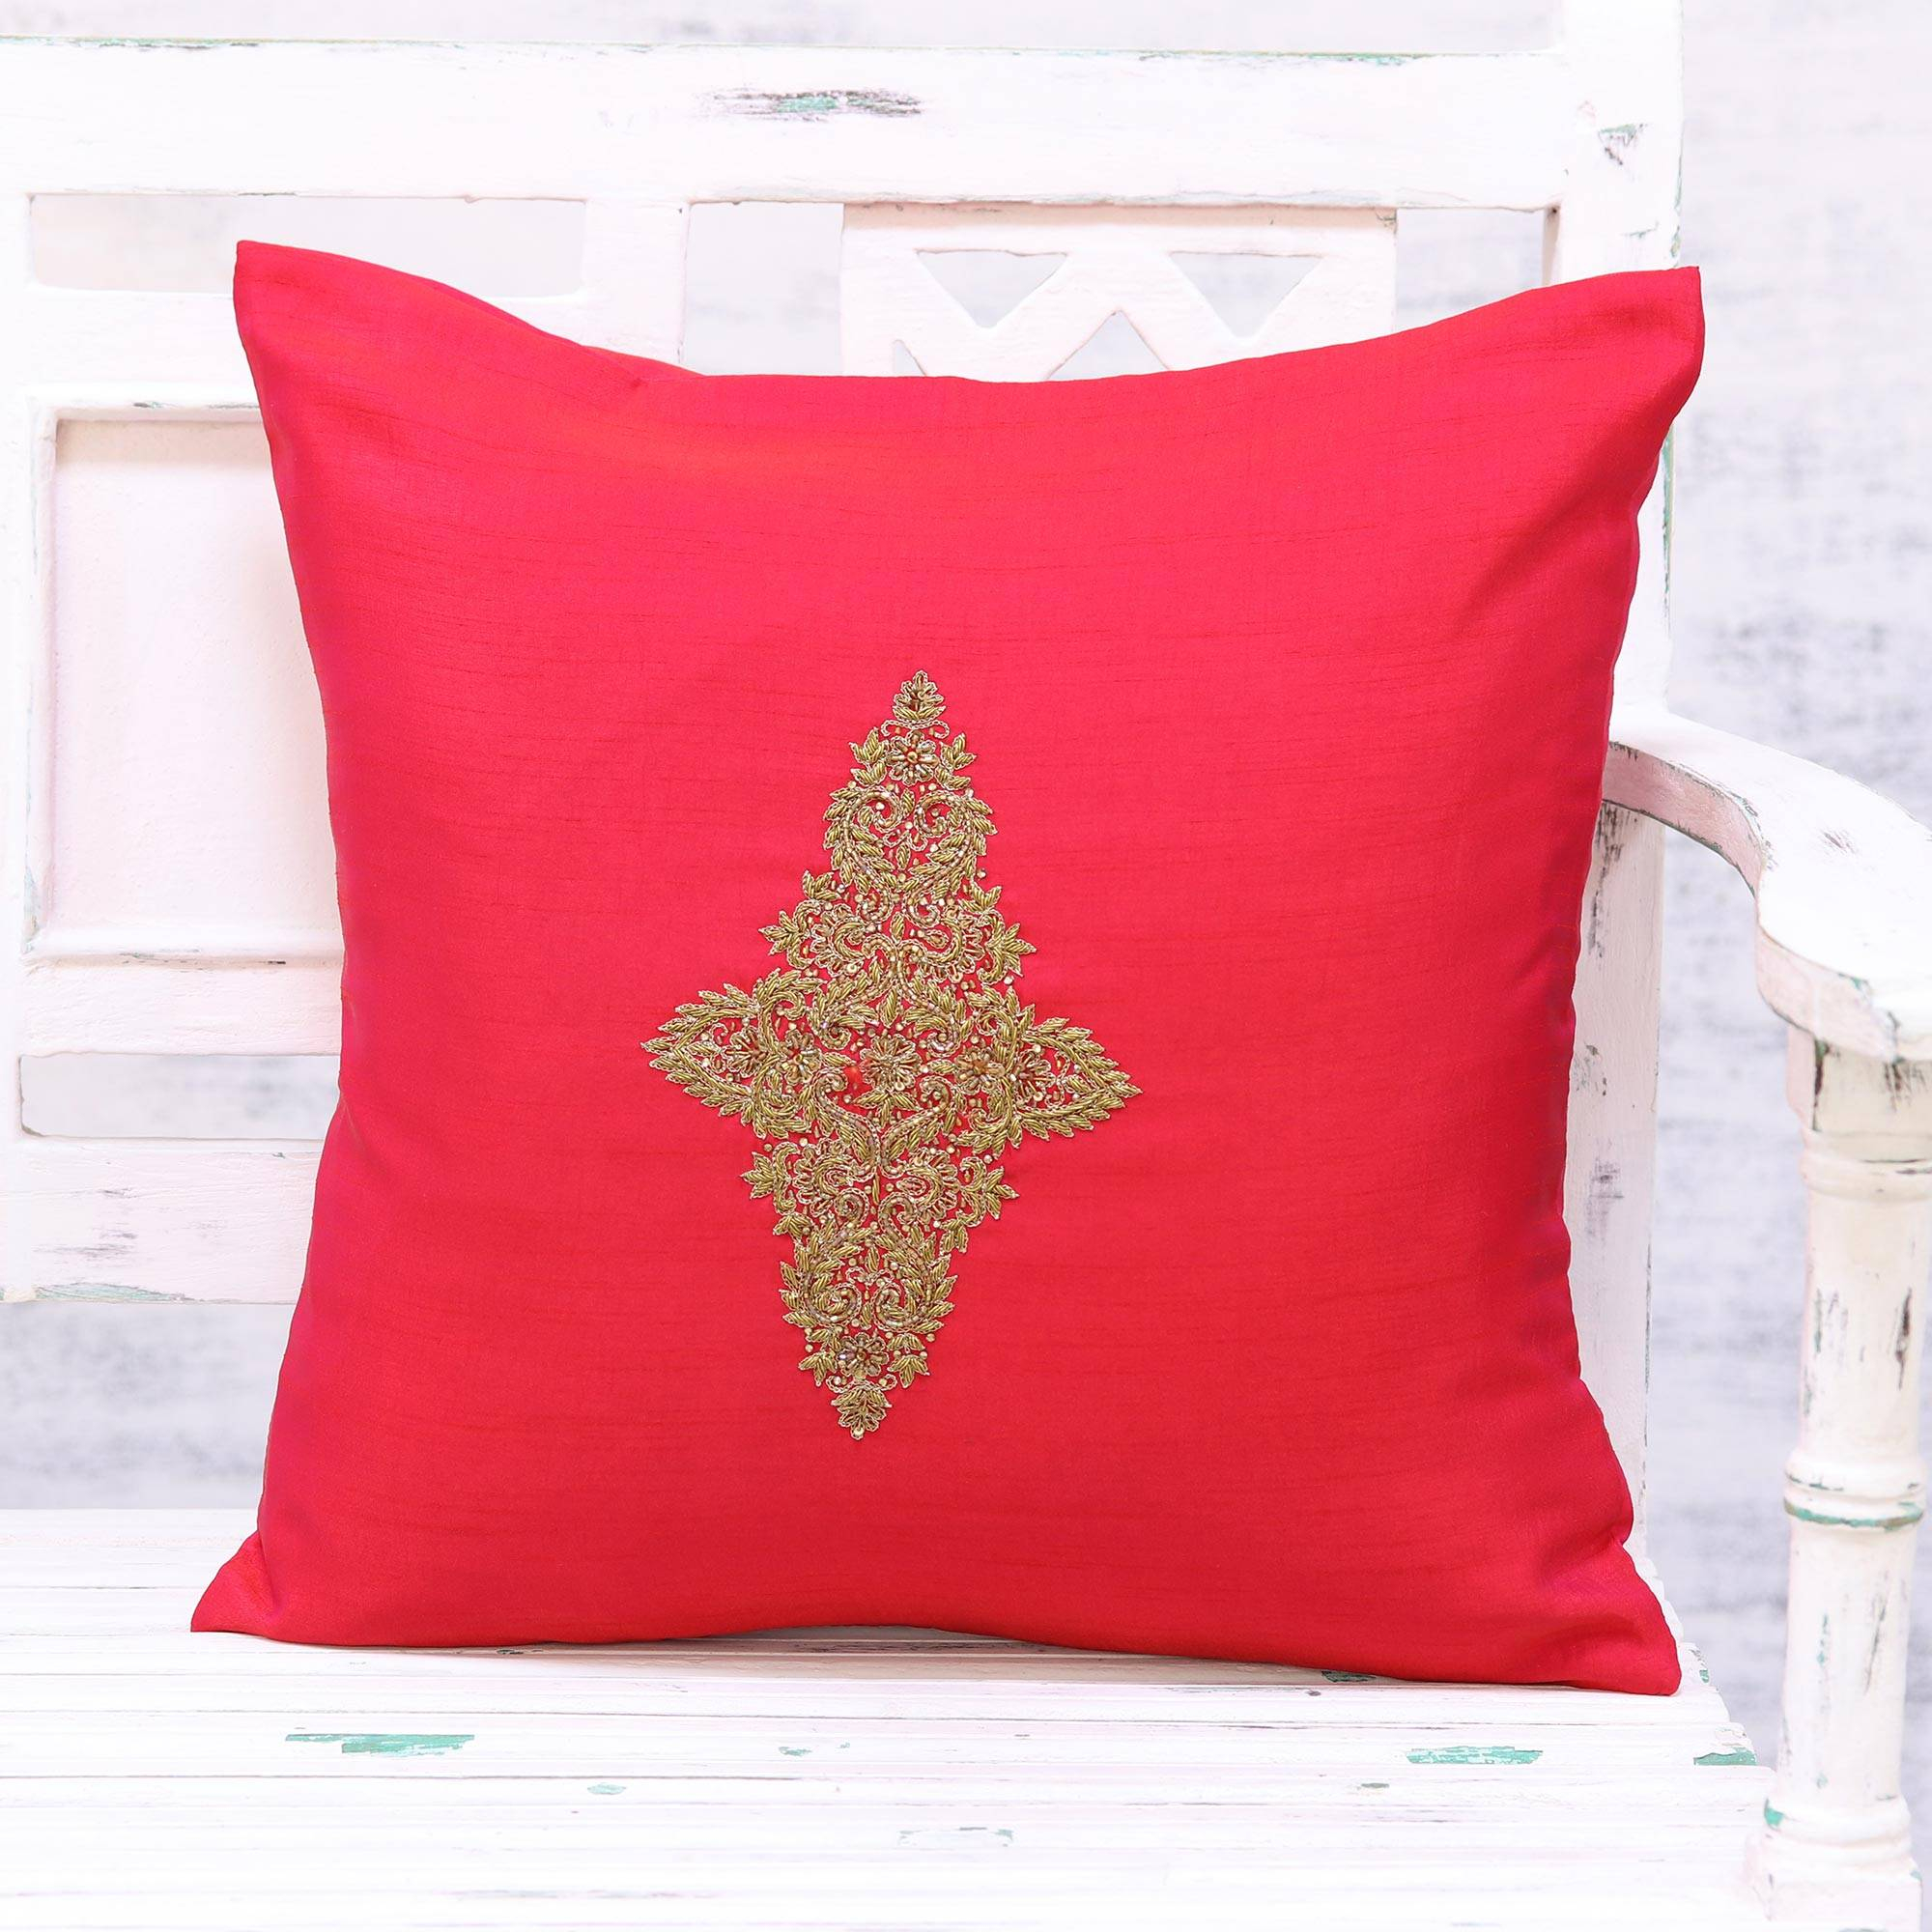 Cushion Cover Embroidery Patterns Hand Embroidered Red Floral Cushion Cover From India Floral Kashmiri In Red